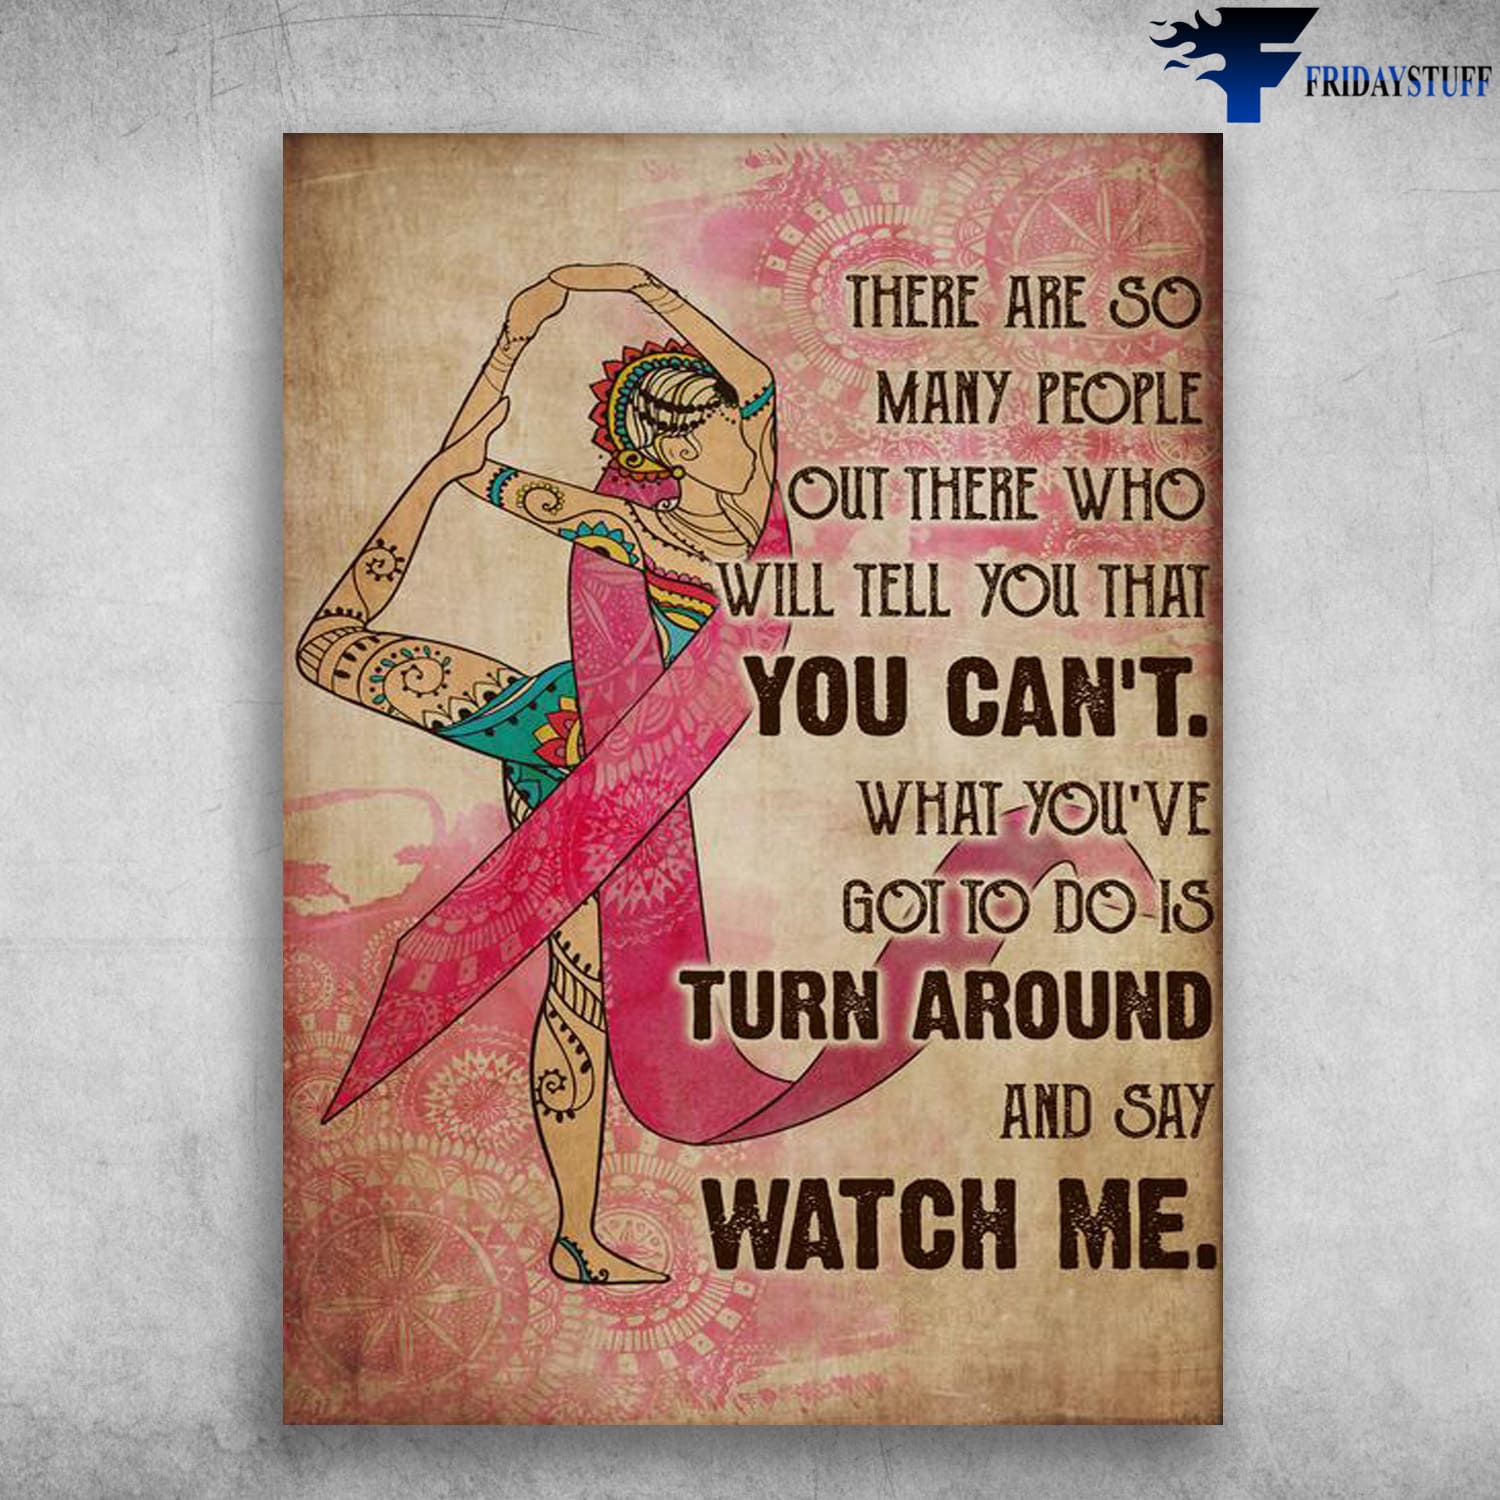 Yoga Poster,Yoga Girl, Awareness Ribbon, There Are So Many People Out There, Who Will Tell You, What You've Got To Do, Is Turn Around, And Say Watch Me